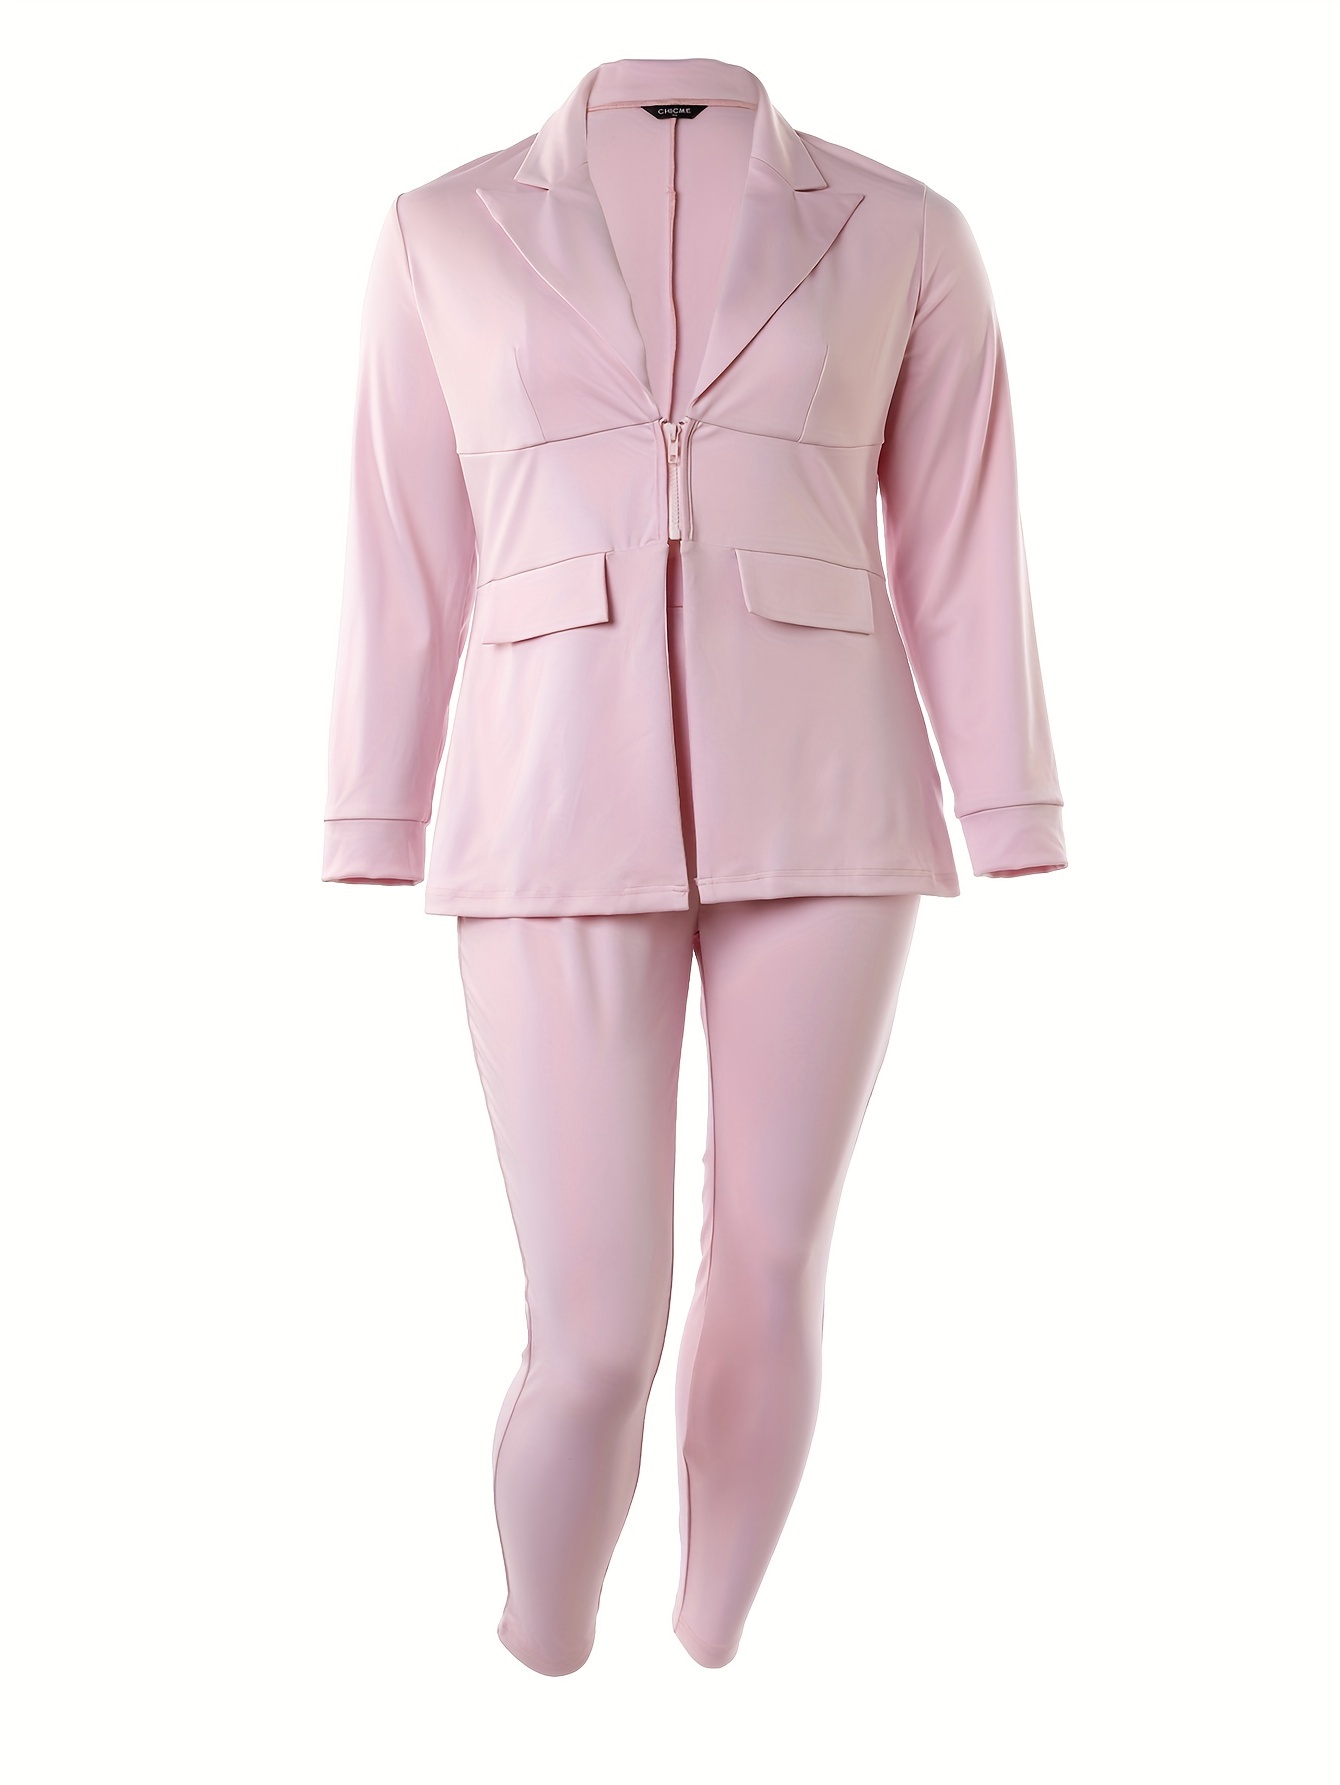 Feather Long Sleeve Pink Pants Suit Set For Women Plus Size Office